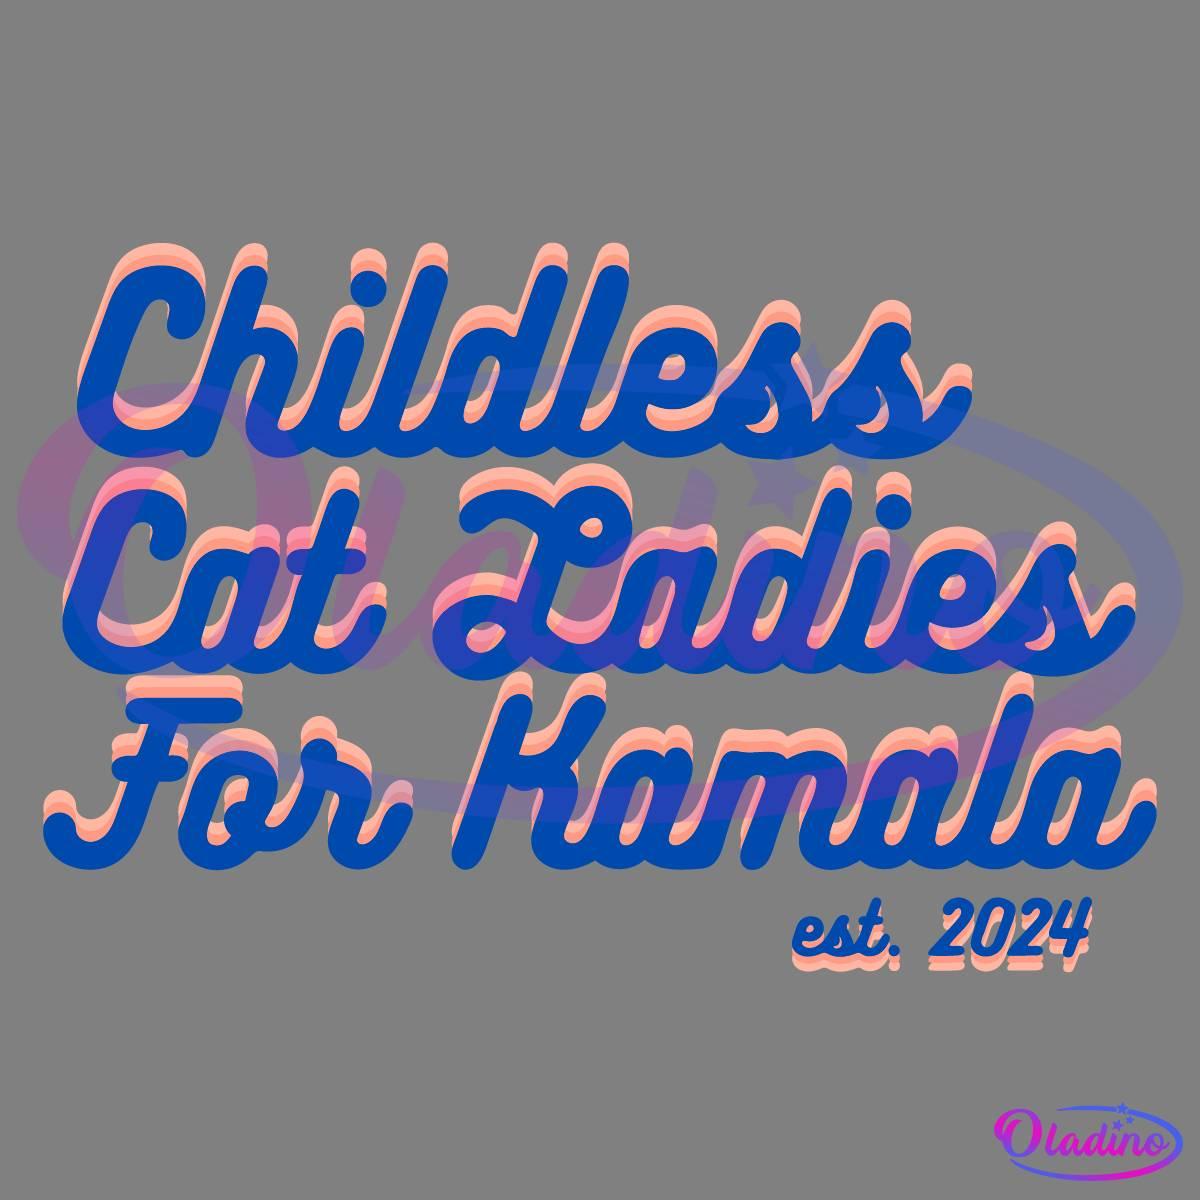 The image features the text "Childless Cat Ladies For Kamala est. 2024" written in a bold, cursive font with a blue and pink gradient effect.